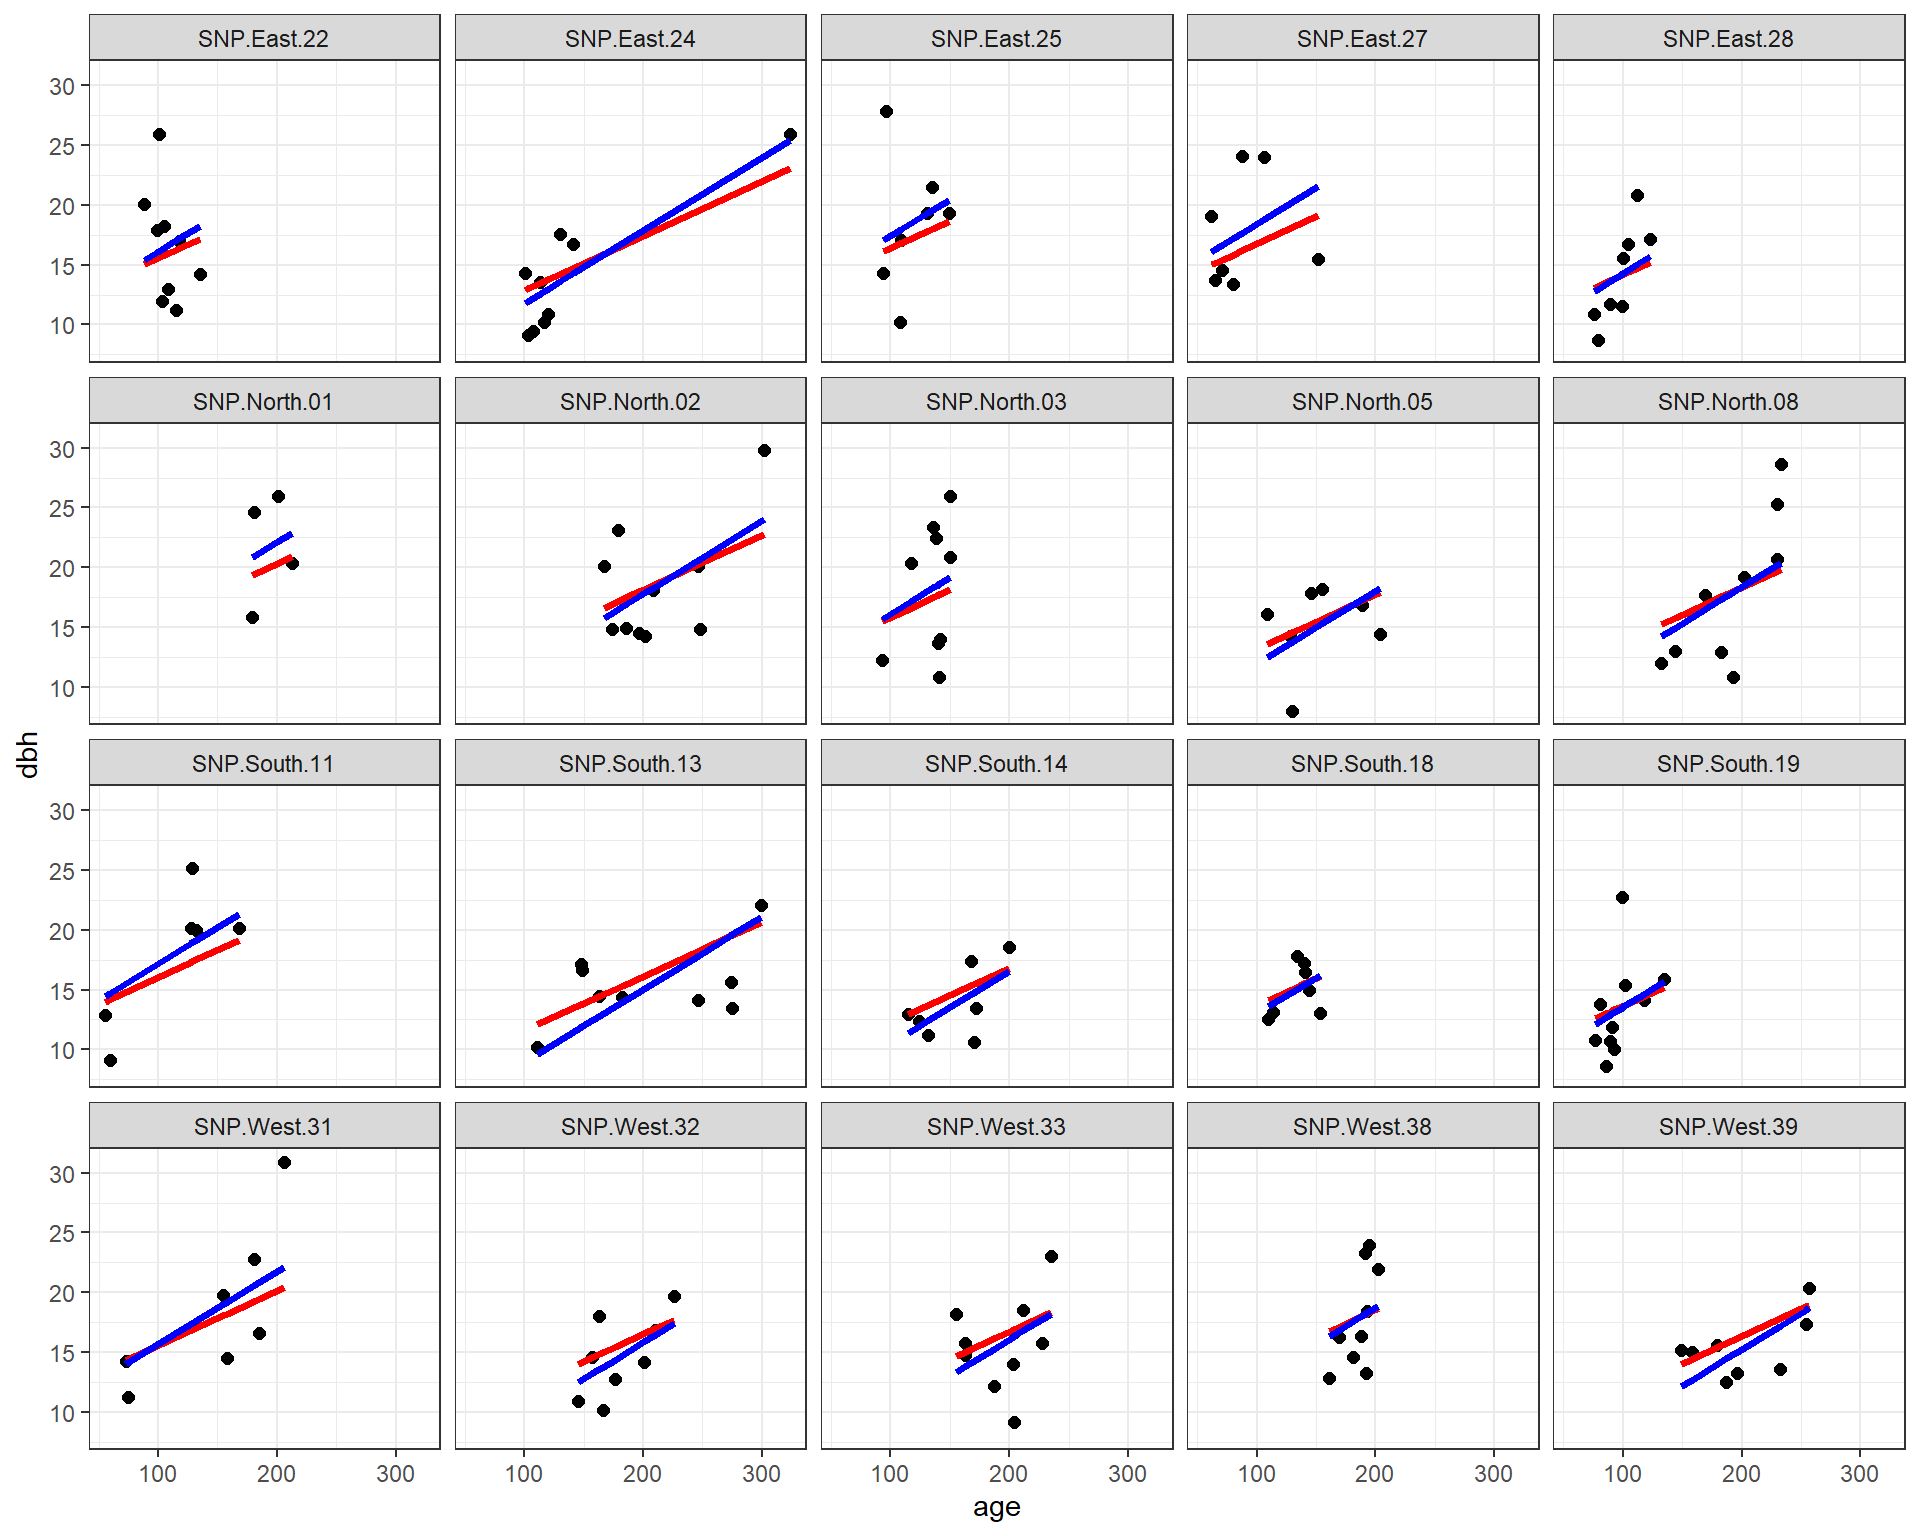 Fitted regression lines relating dbh to tree age using a fixed-effects (only) model (blue) and a mixed-effects model with random intercepts (red). In both cases, the effect of age is assumed to be constant across sites.